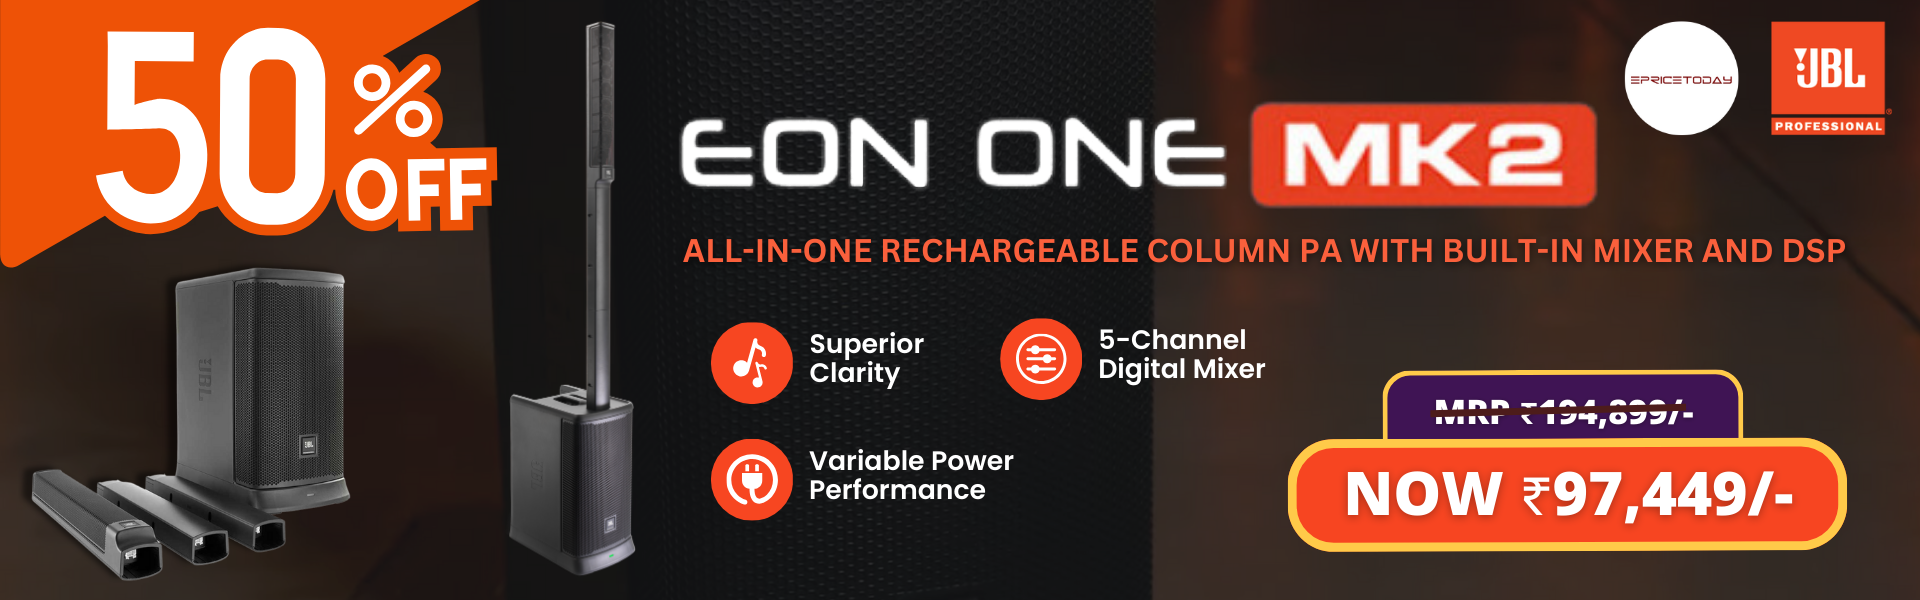 JBL Professional EON ONE MK2 All-In-One Rechargeable Column PA With Built-In Mixer And DSP